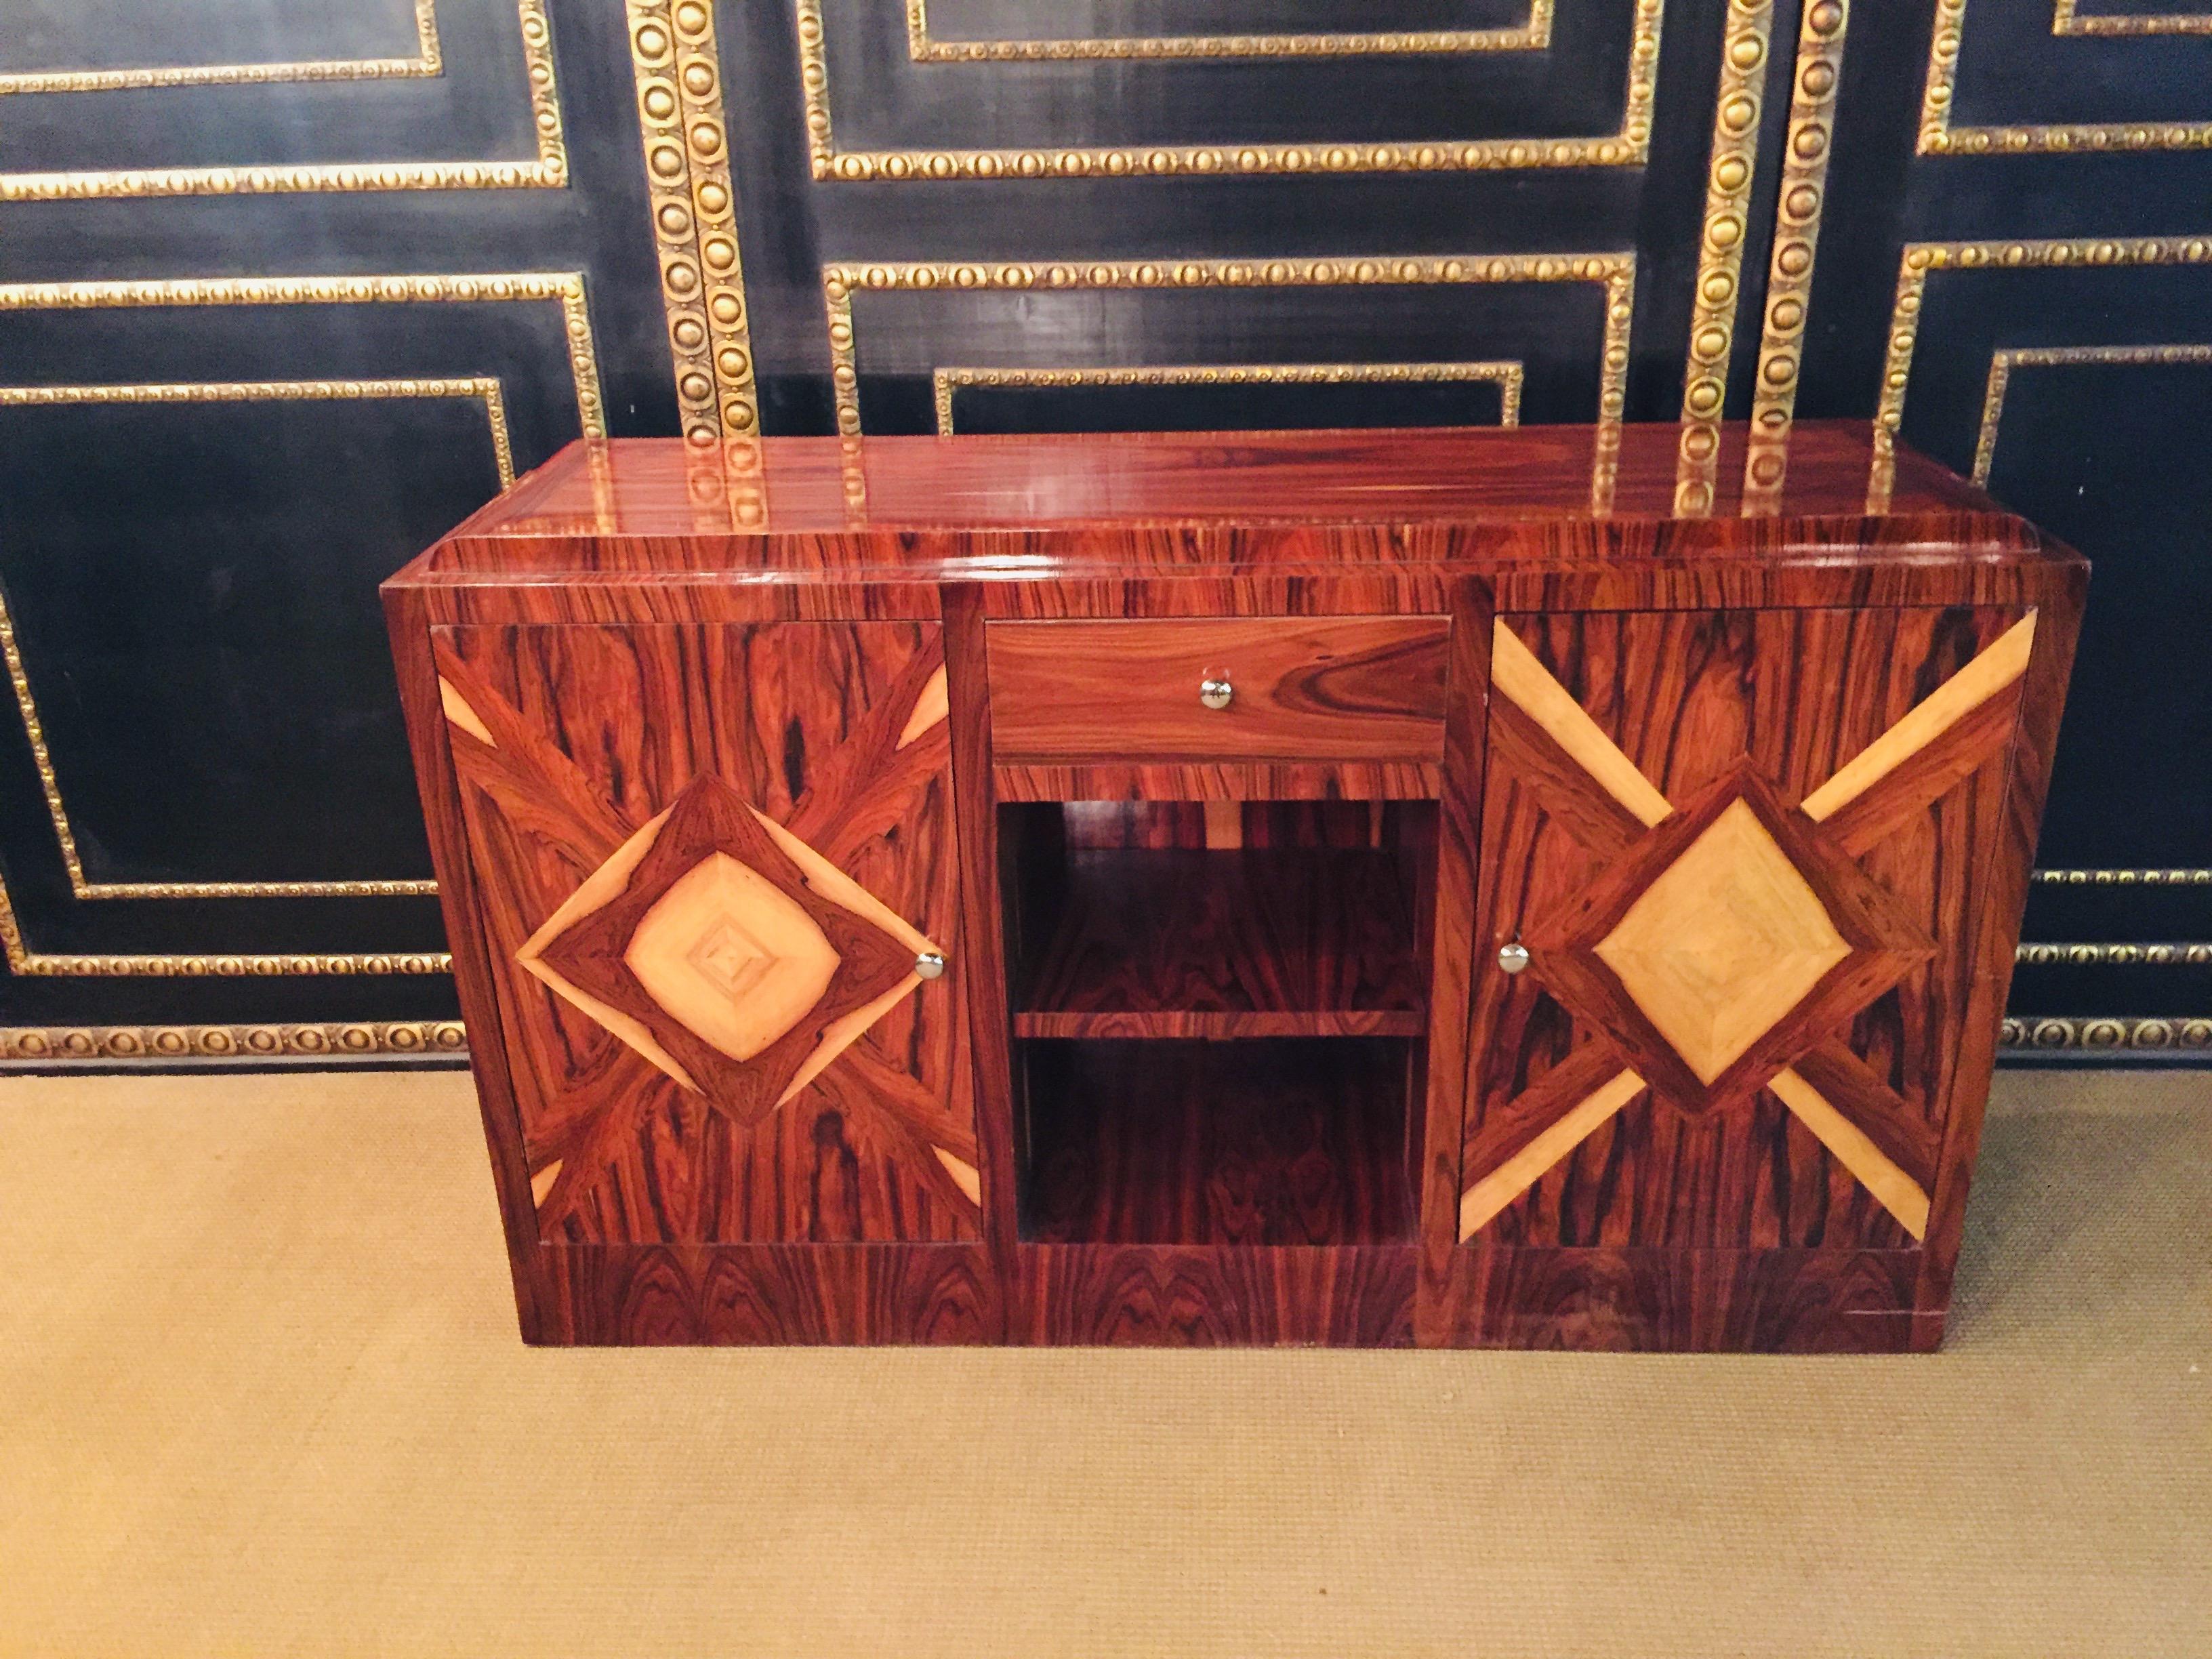 Exotic Indian rosewood on softwood. Rectangular, elongated body on rectangular base plate. In the front center a drawer below open compartment flanked by a double door. Behind each one shelf. Decorative veneer picture.
Beautiful patina, with